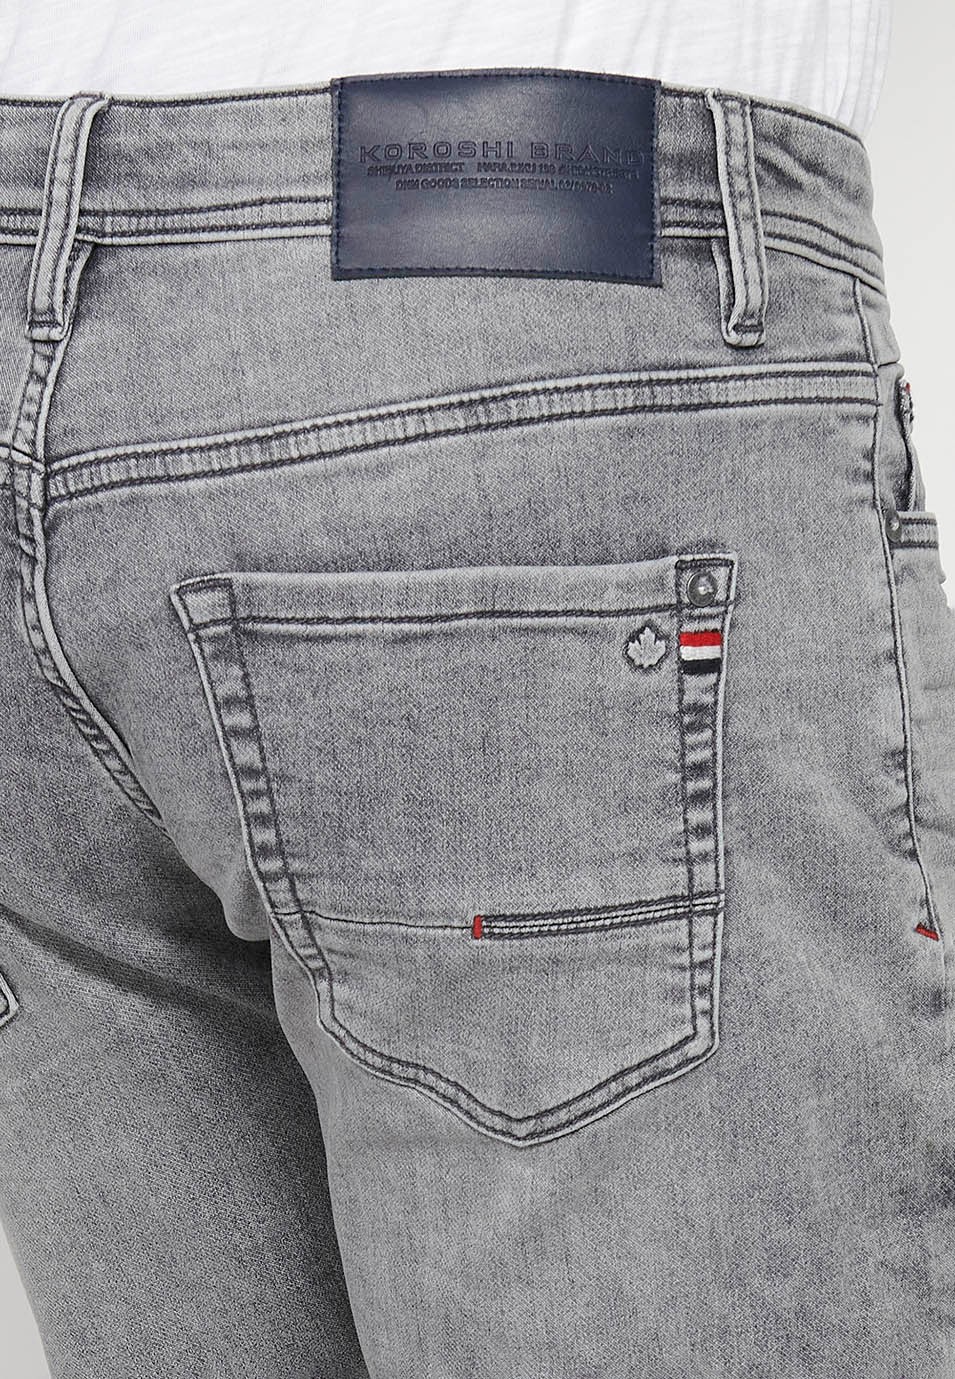 Denim shorts with front closure with zipper and button with five pockets, one pocket in Gray Denim Color for Men